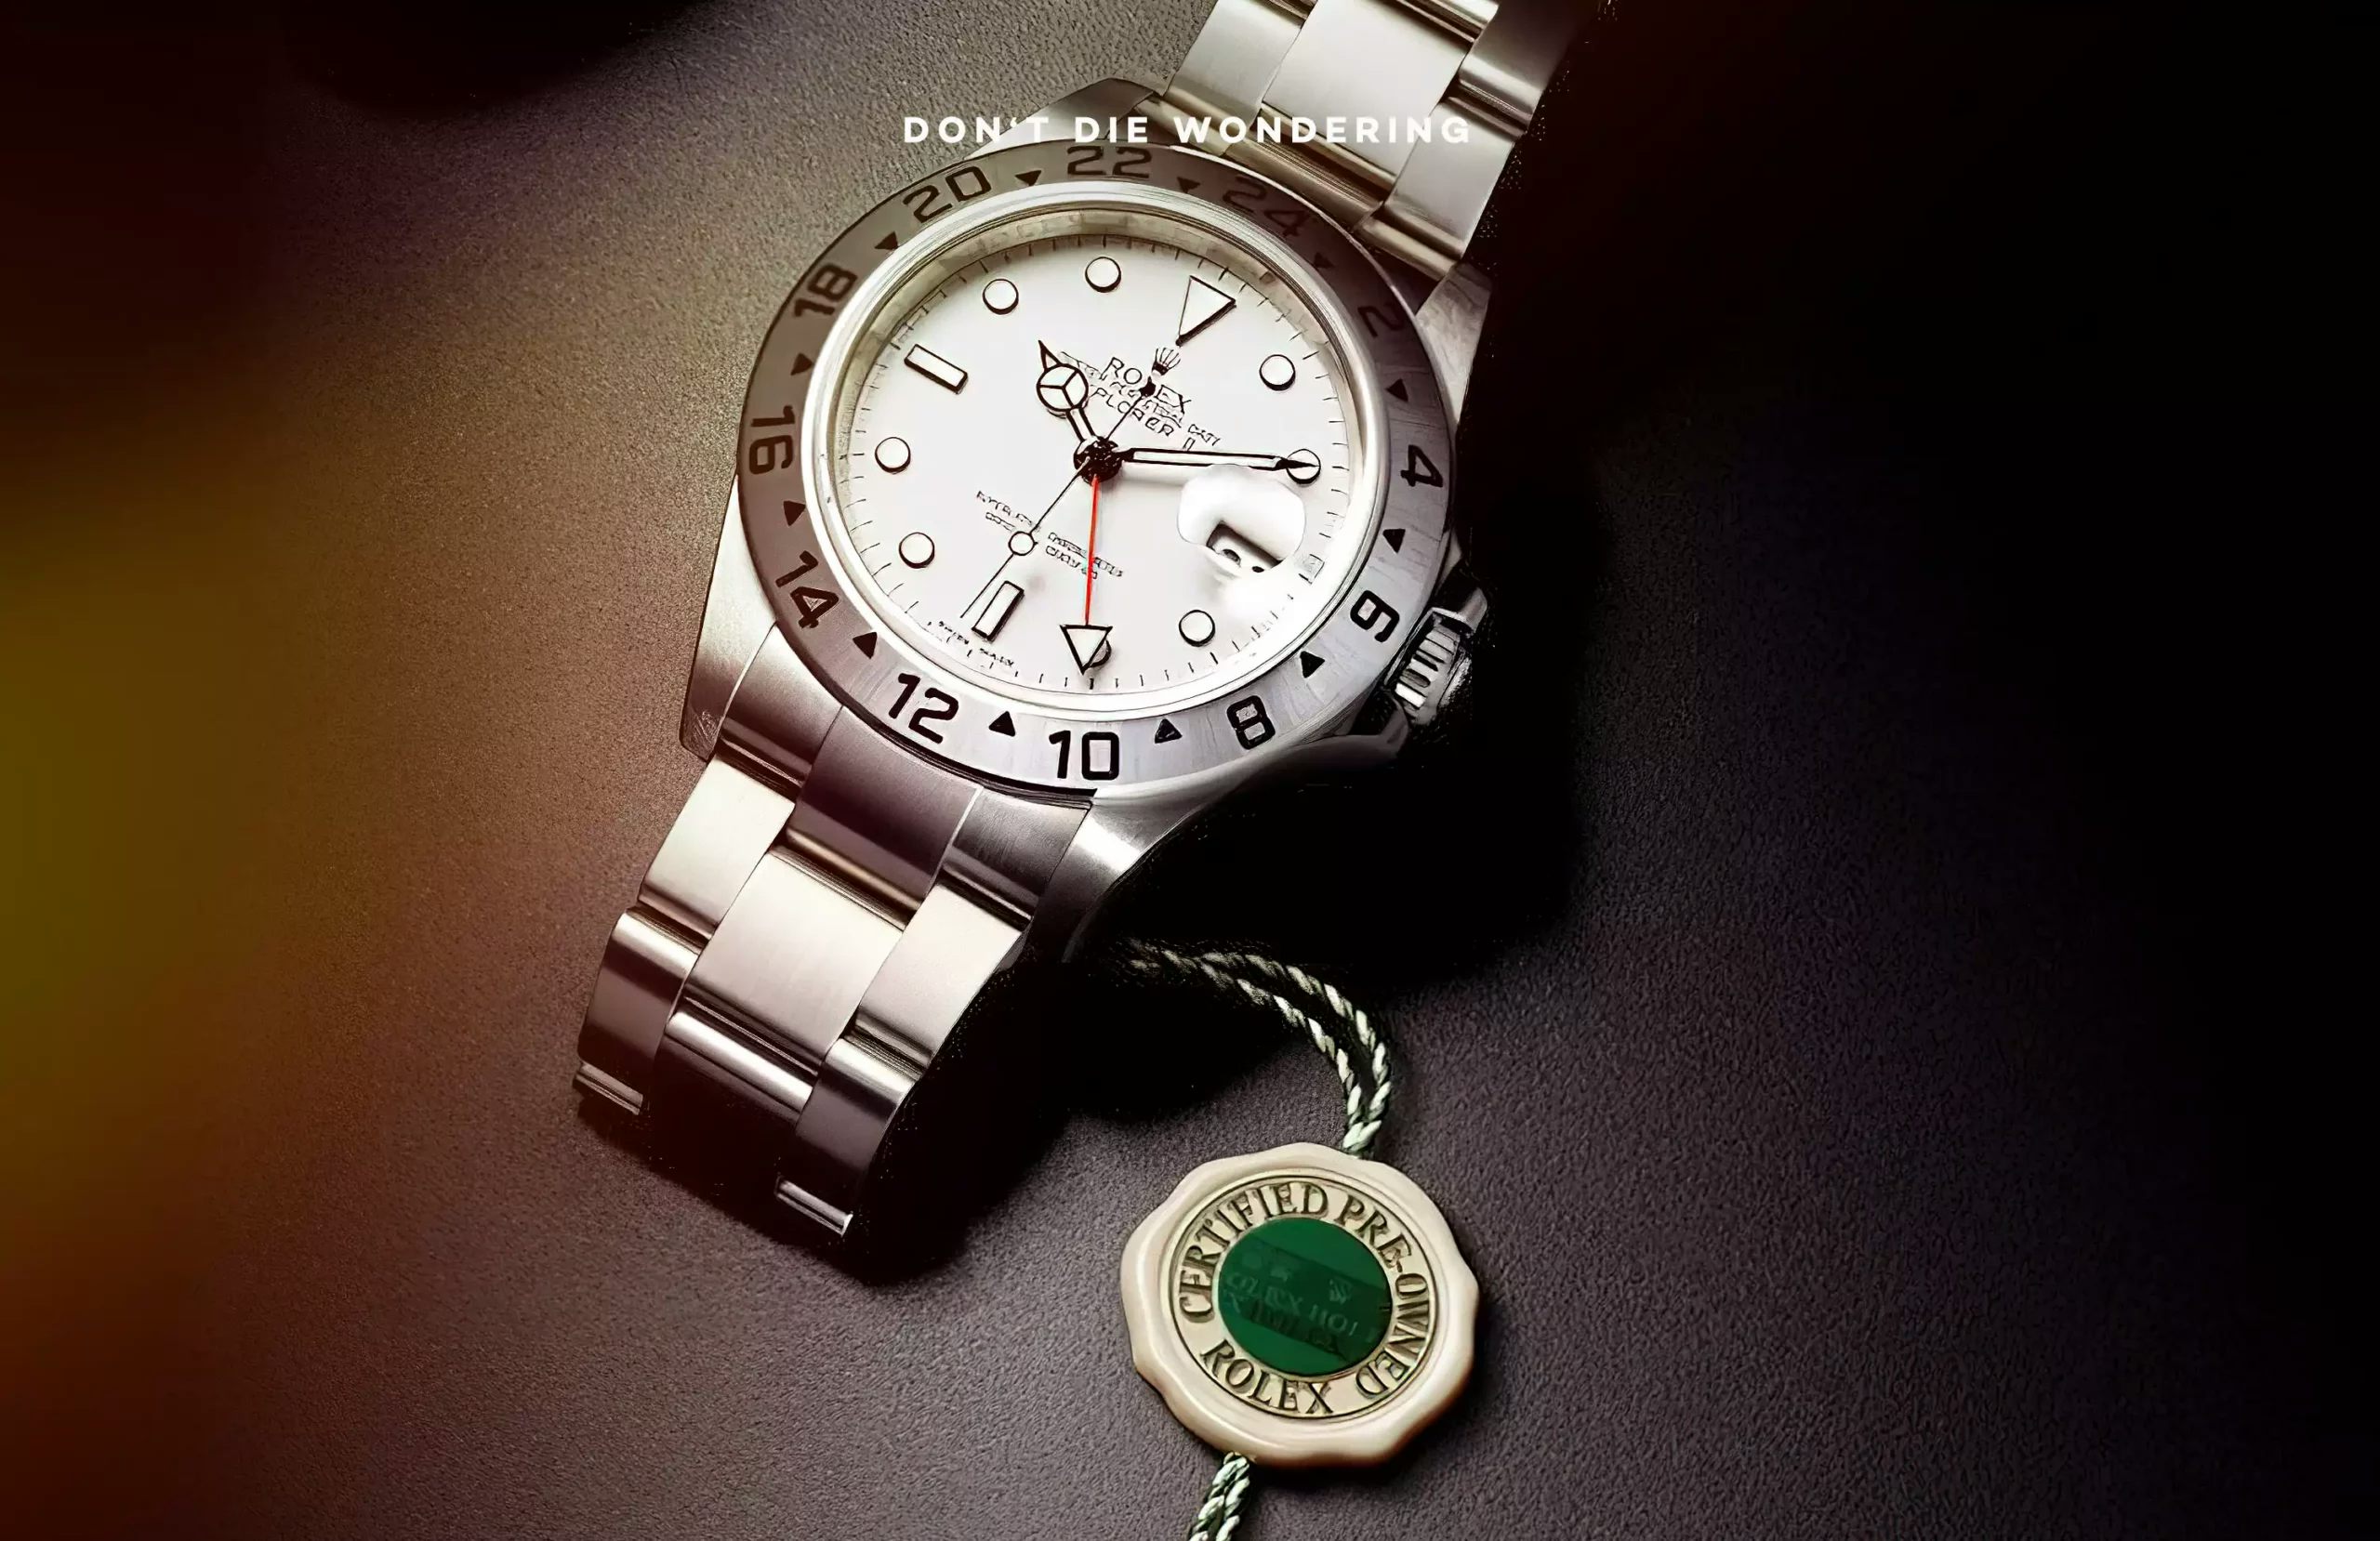 All on Rolex and Their Pre-Owned Watch Service